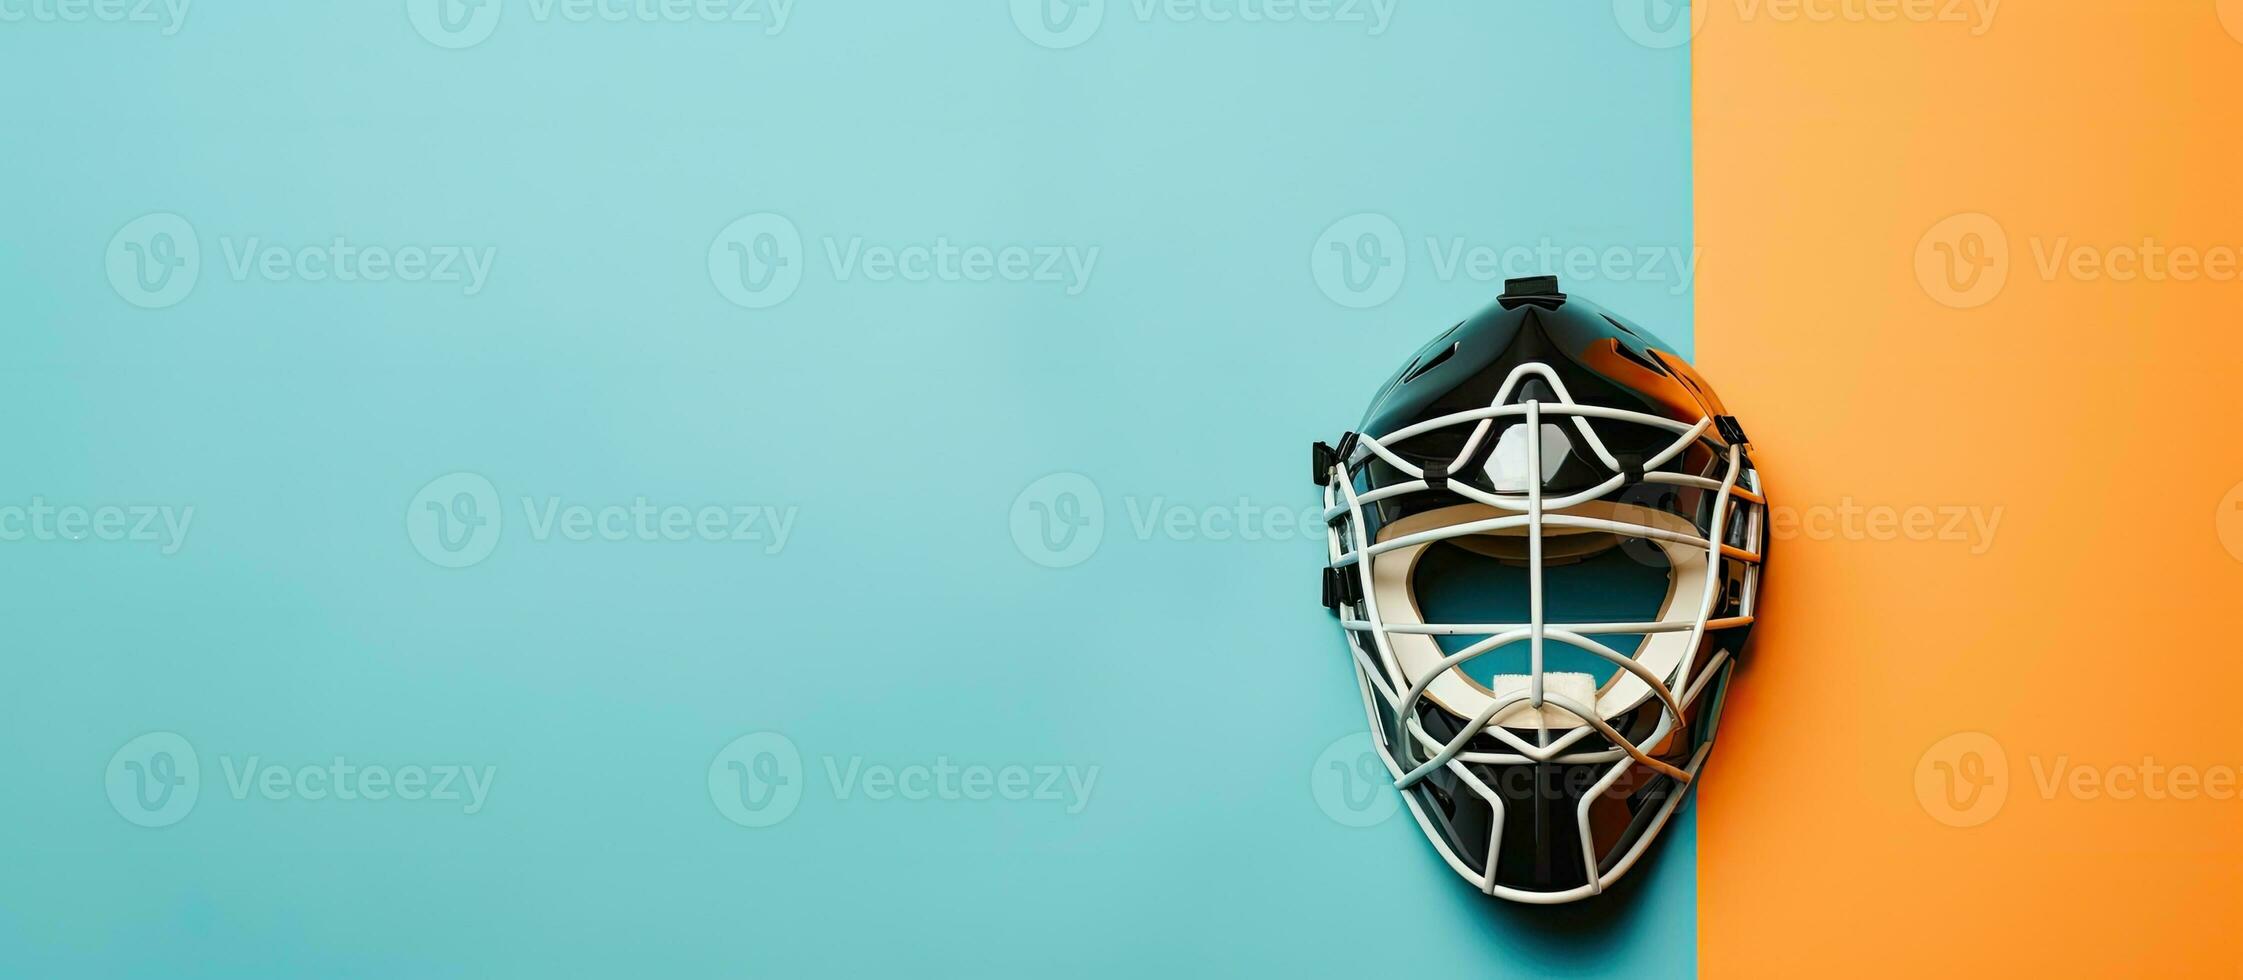 Photo of a black mask hanging on a vibrant blue and yellow wall with copy space